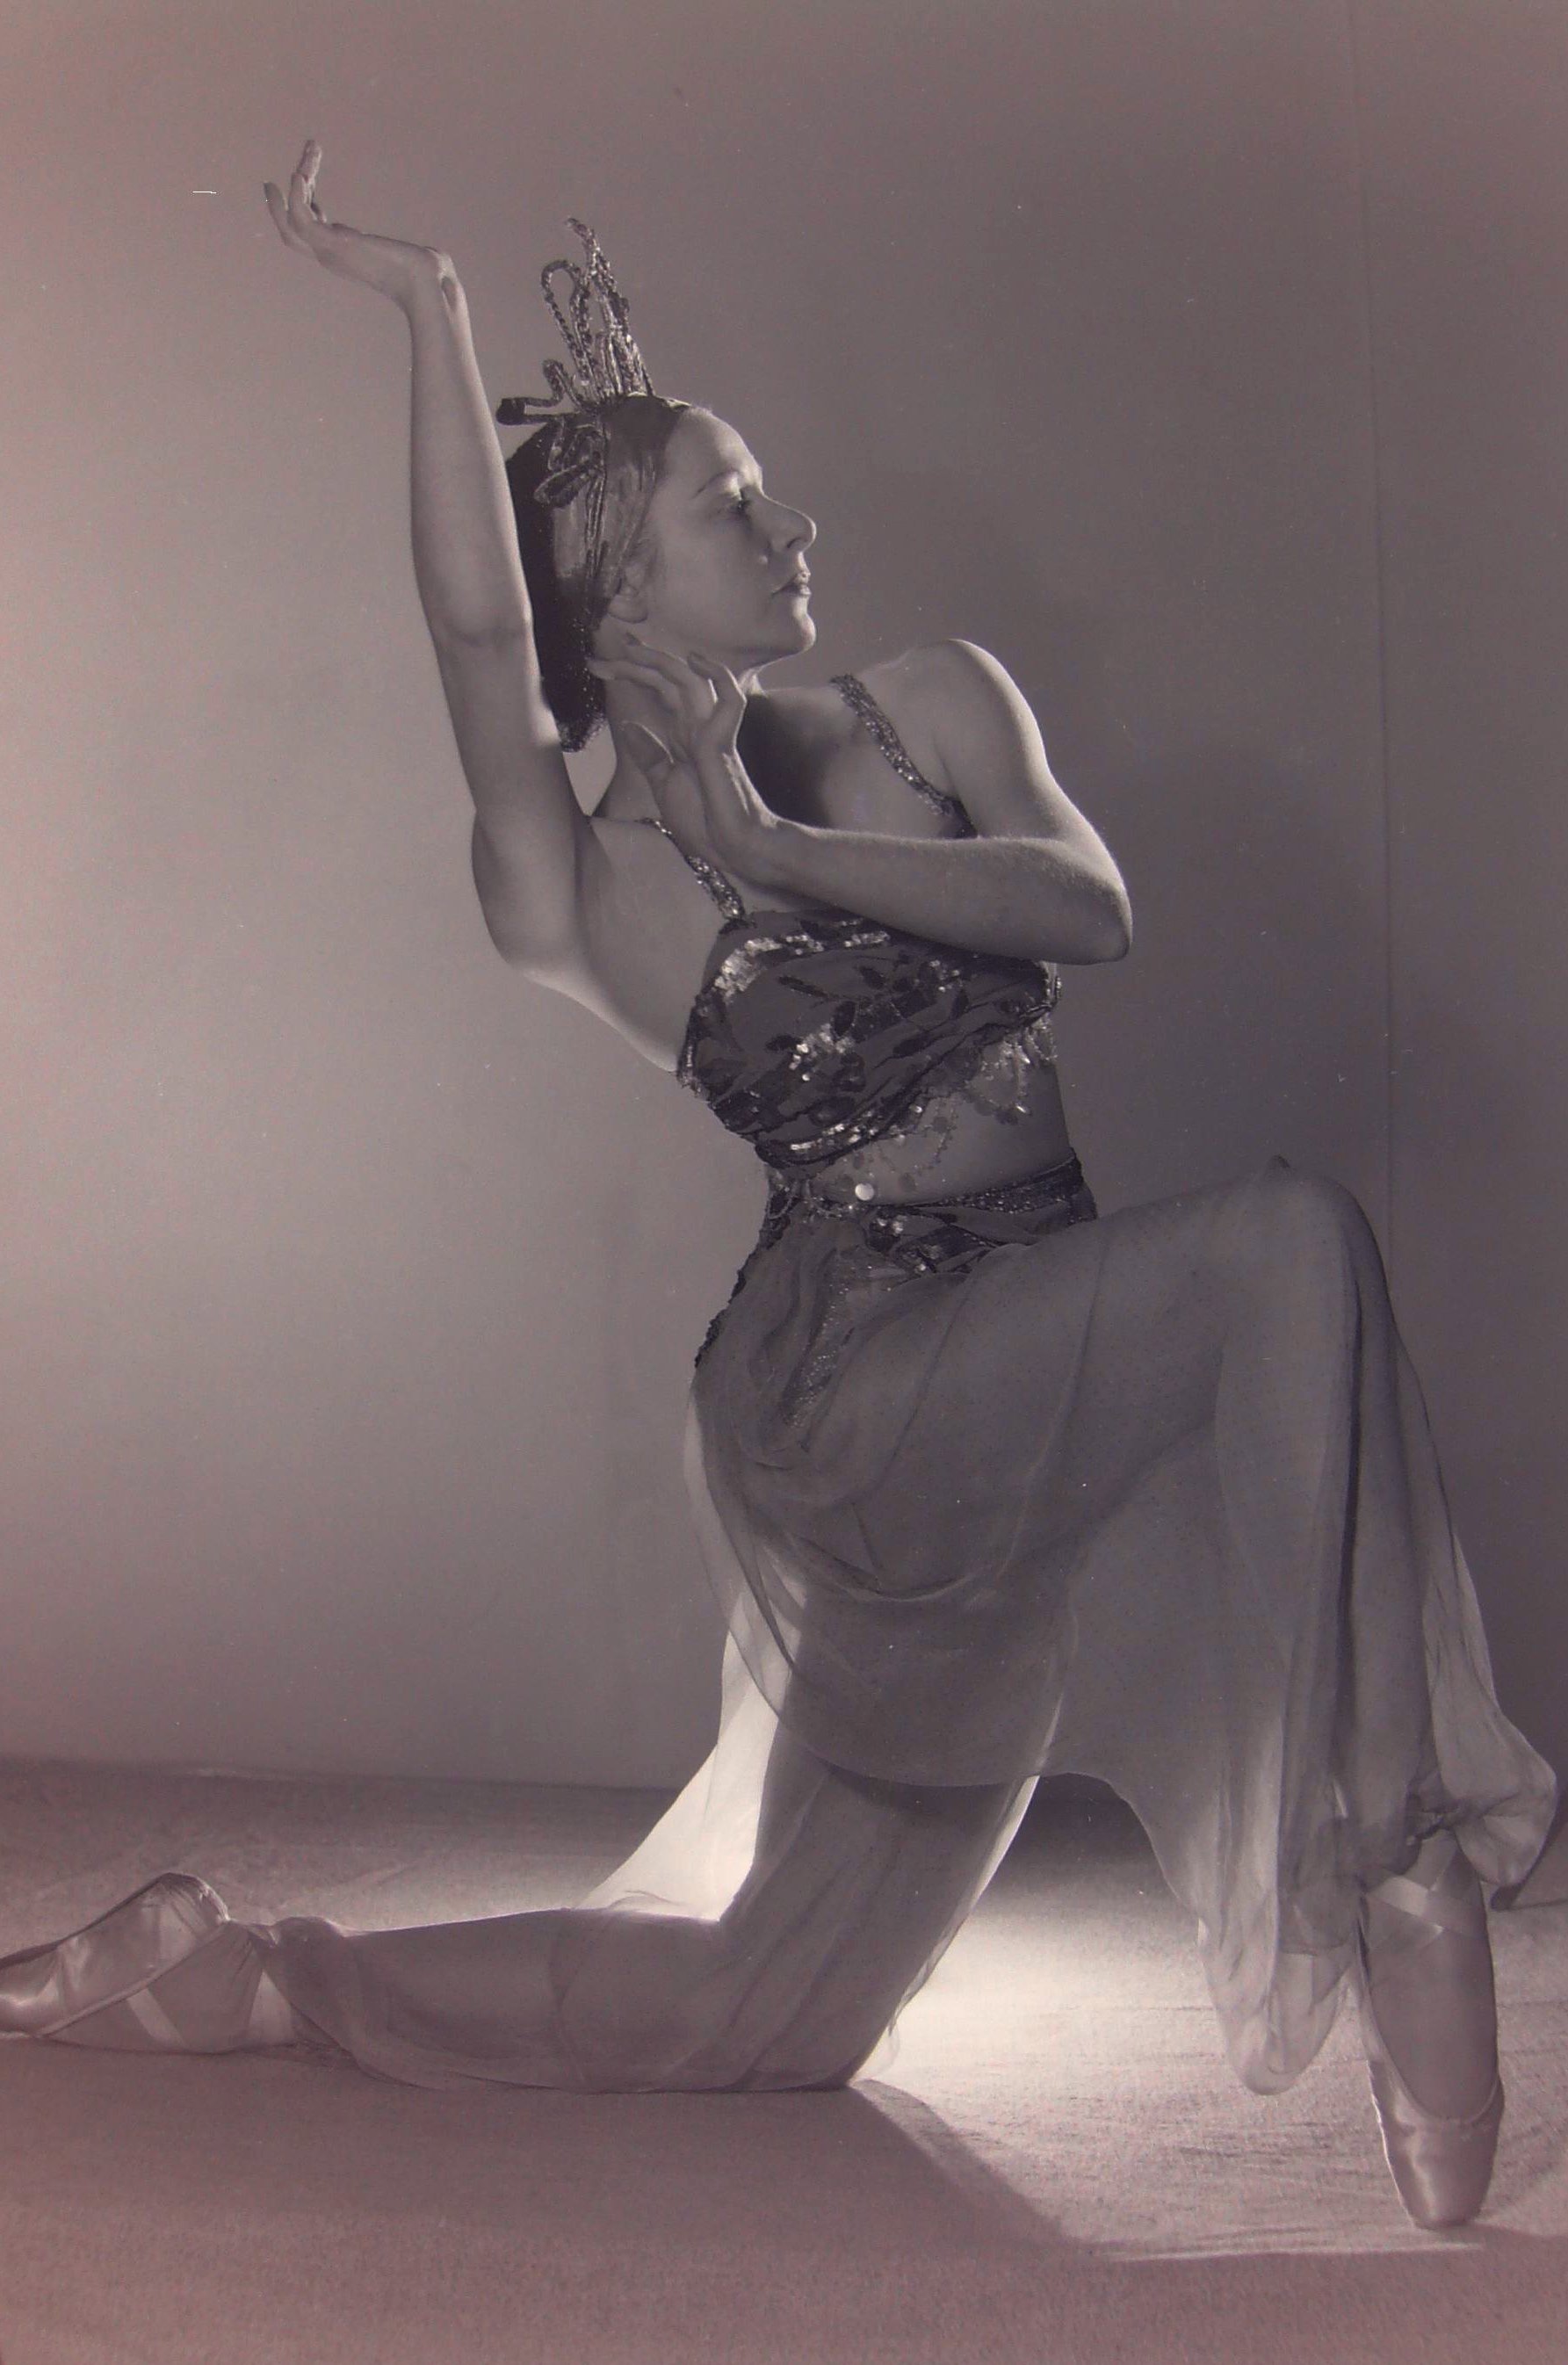 Alison Lee, stage name Helene Lineva and star of the Original Ballet Russe, 1939-1940, posing in the studio, Sydney / photographer Max Dupain